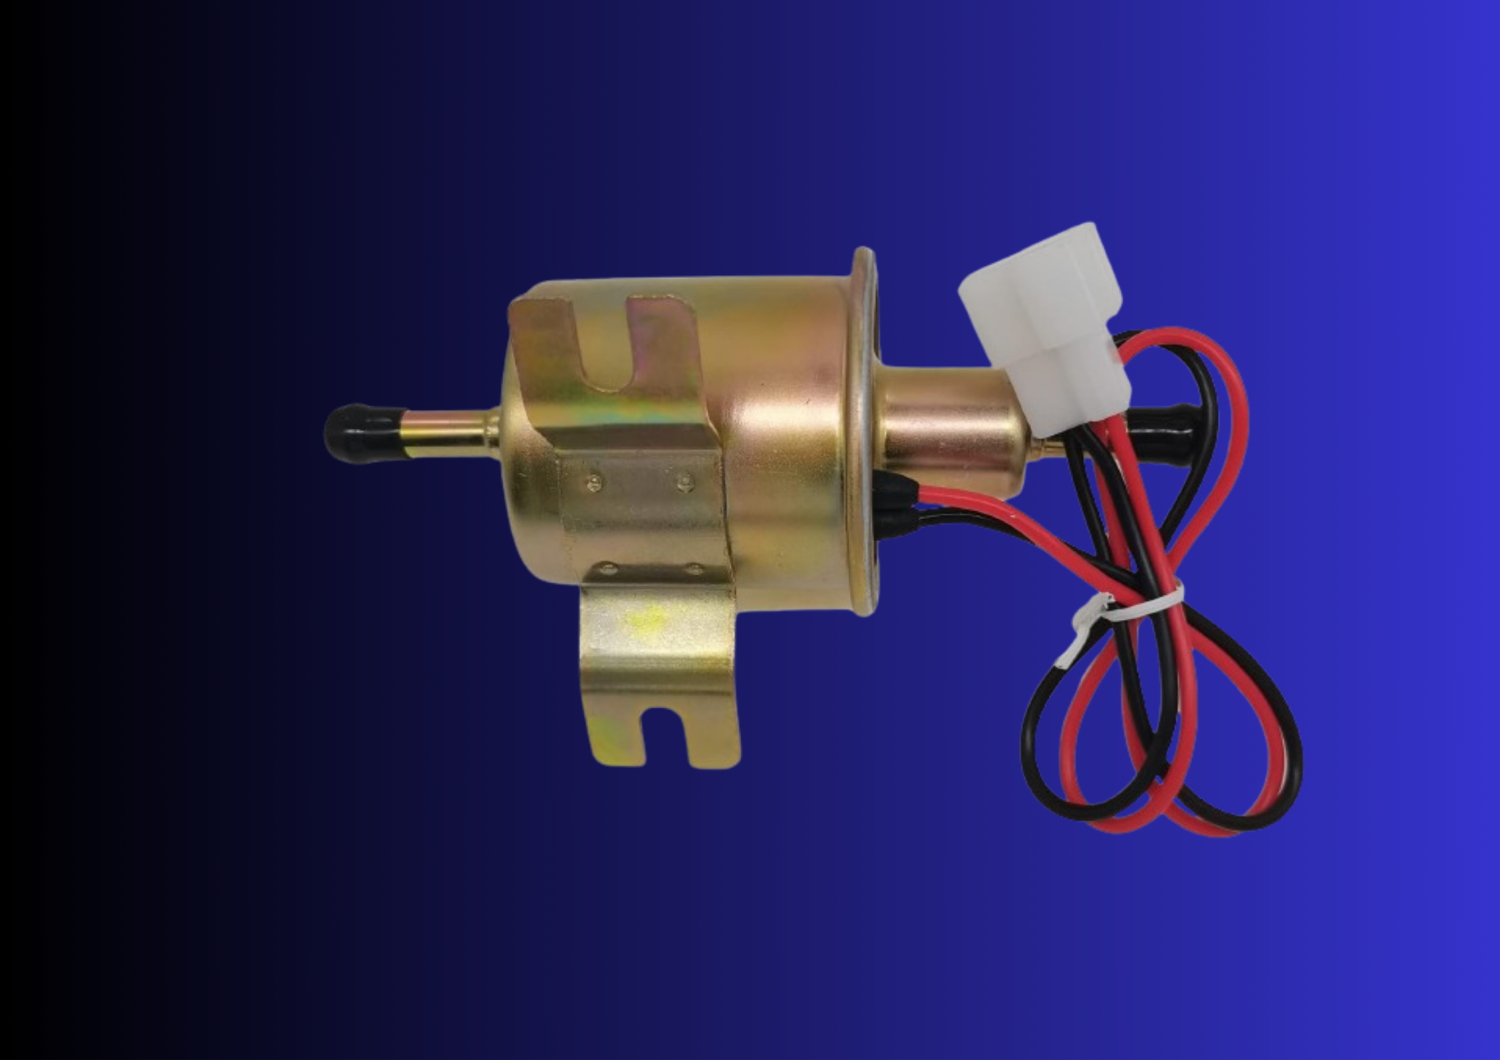 12V Electric Fuel Pump HEP-02A: Reliable Replacement for Motorcycle, ATV, Trucks, Boats - Gasoline/Diesel Engine Compatible, Low Pressure